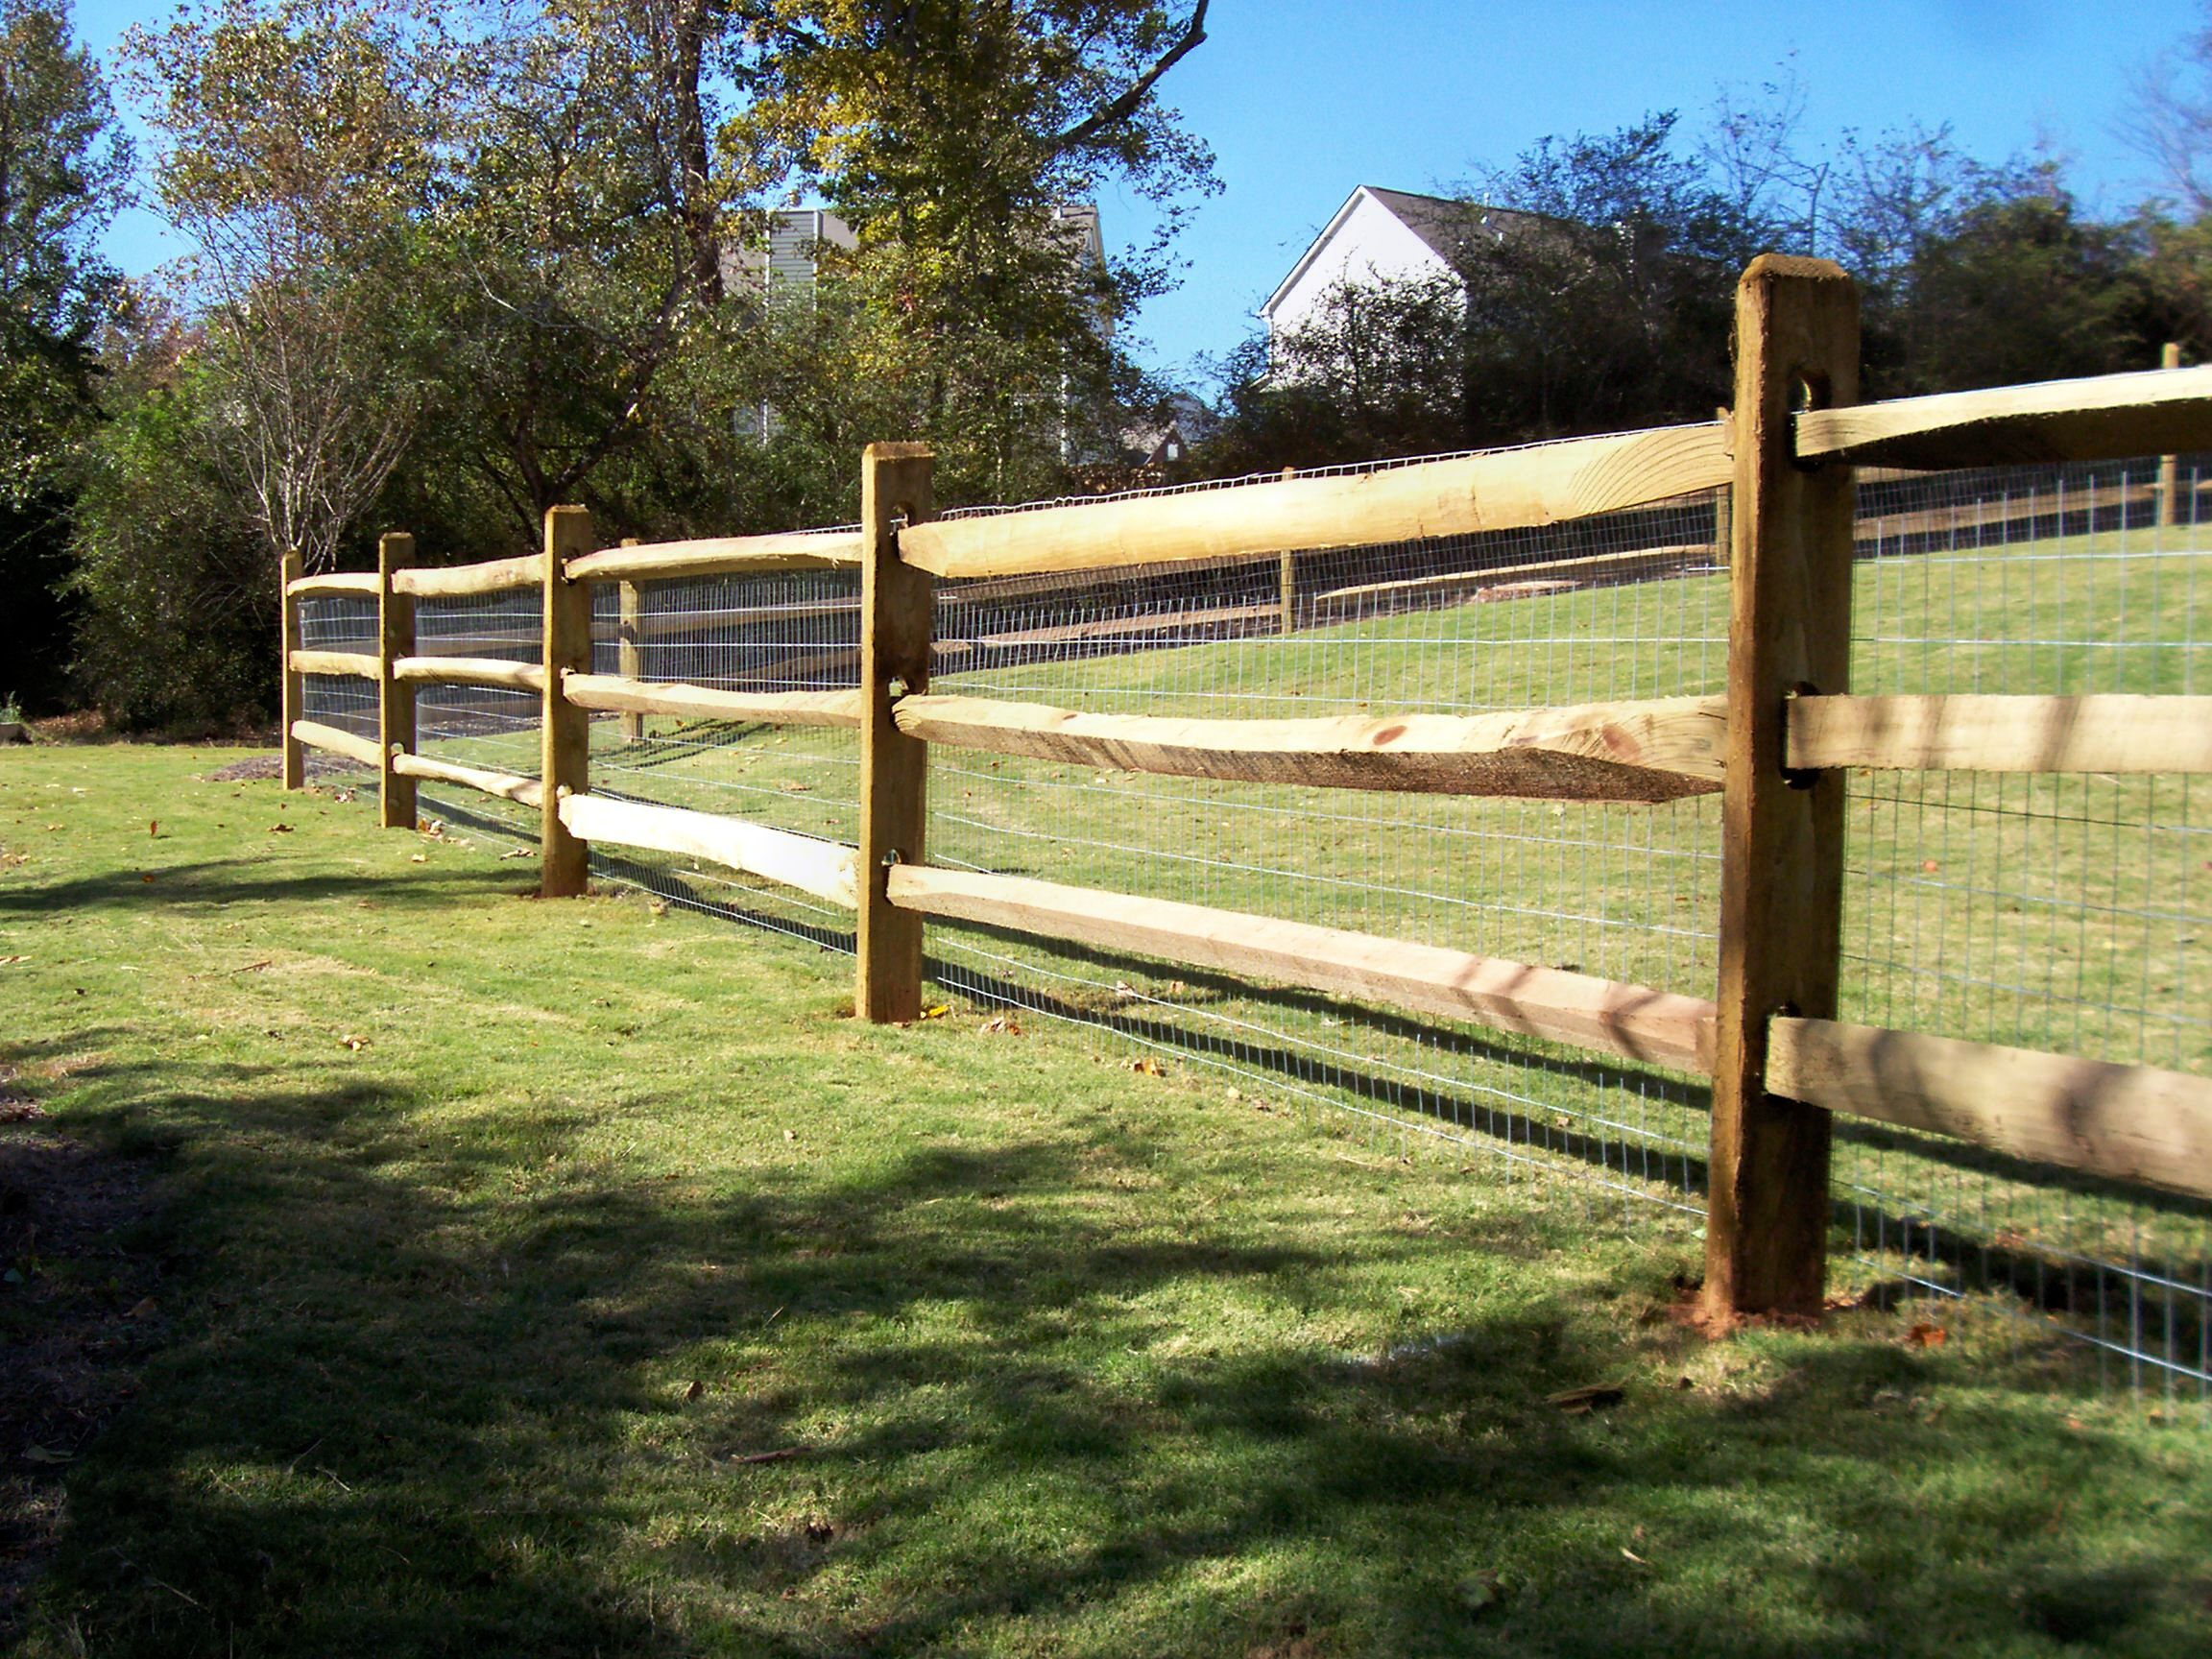 Ranch Style Wood Fence Designs Wood Ranch Rail Fence Fencing Ideas pertaining to proportions 2304 X 1728